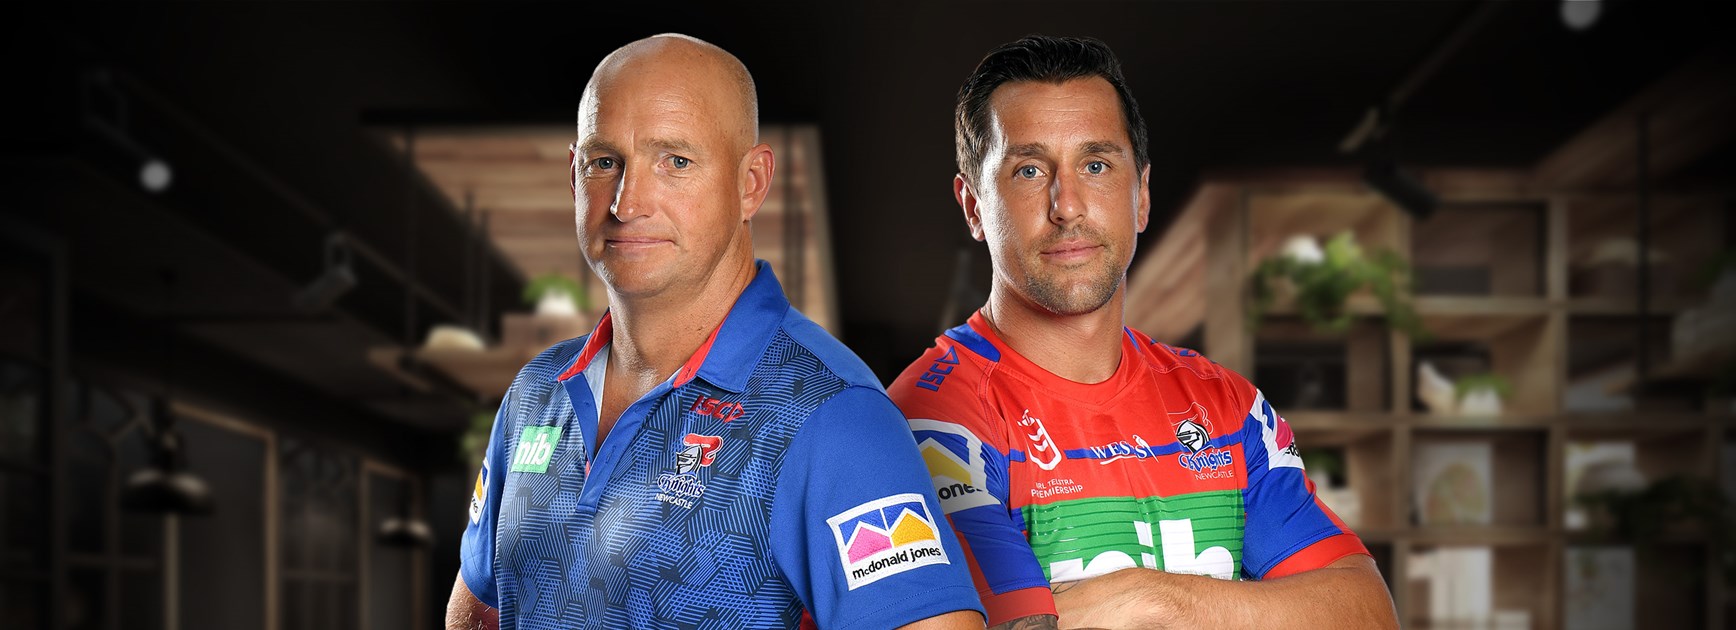 Knight time dining: Brown, Pearce make a meal of rift claims